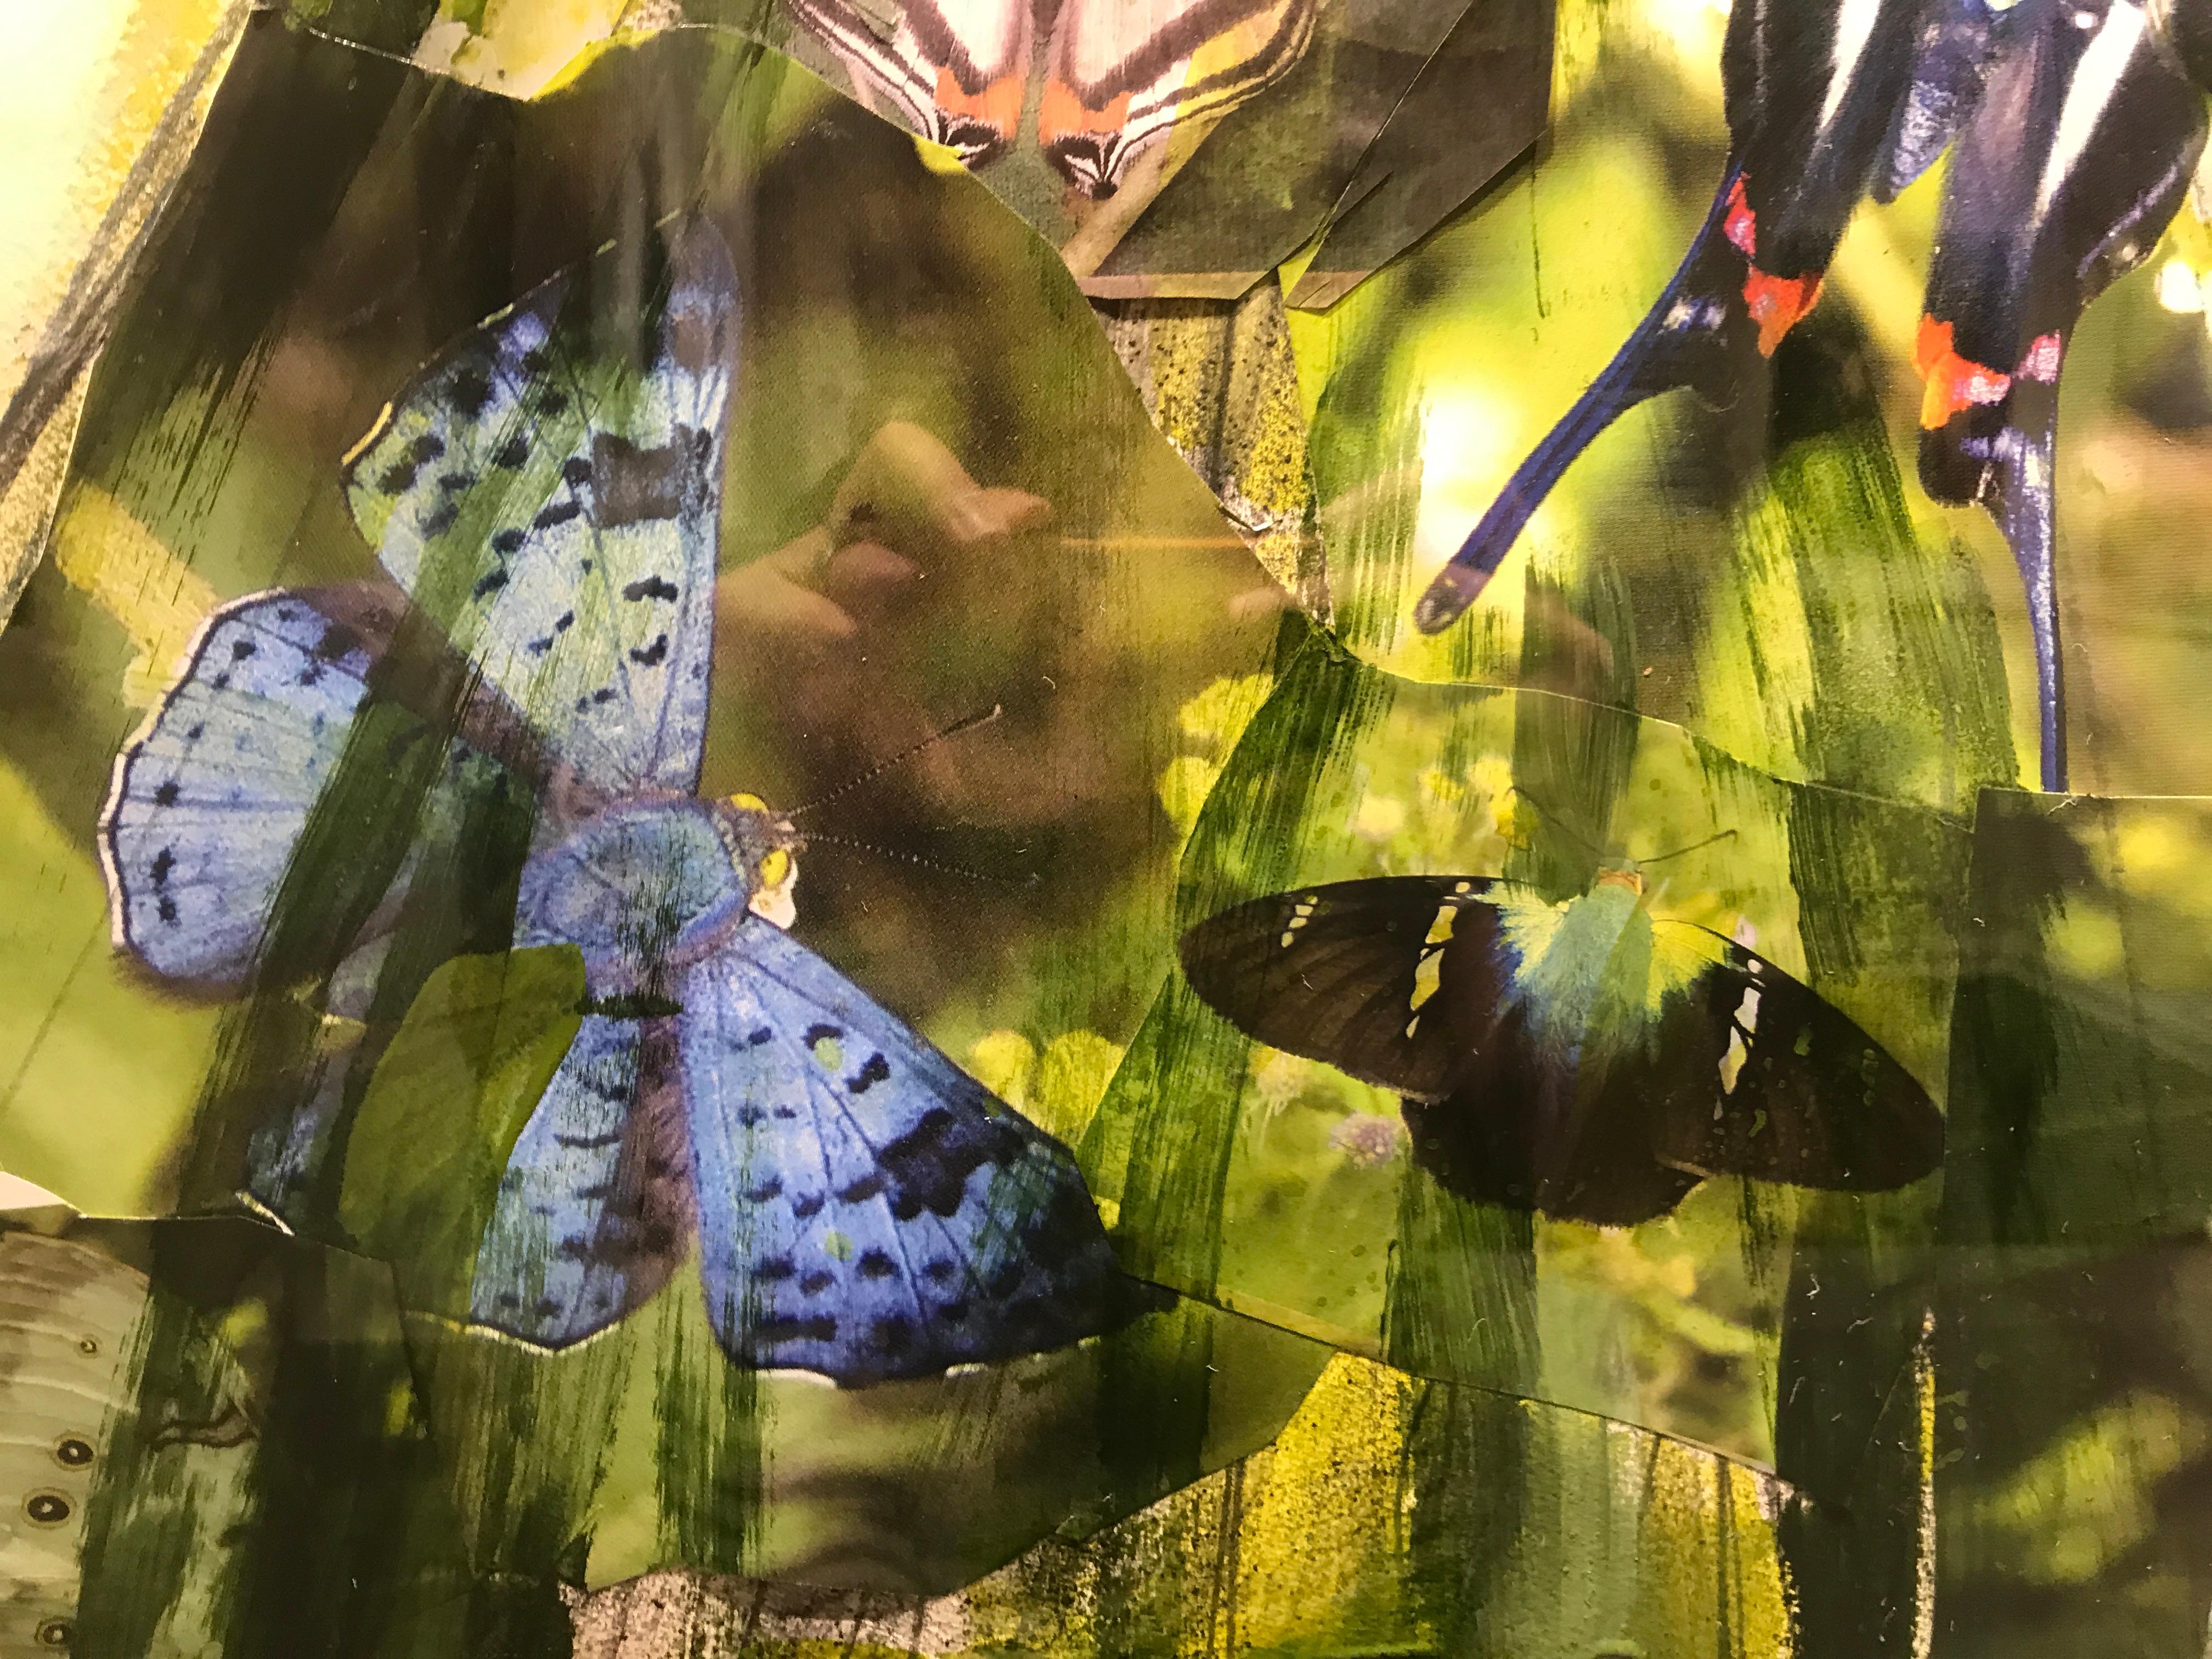 'Madame Butterfly' is a vertical framed Impressionist mixed media on paper painting created by American artist Bonnie Beauchamp-Cooke in 2019. Named after a Puccini opera and featuring a palette made of green, purple and blue tones, the painting